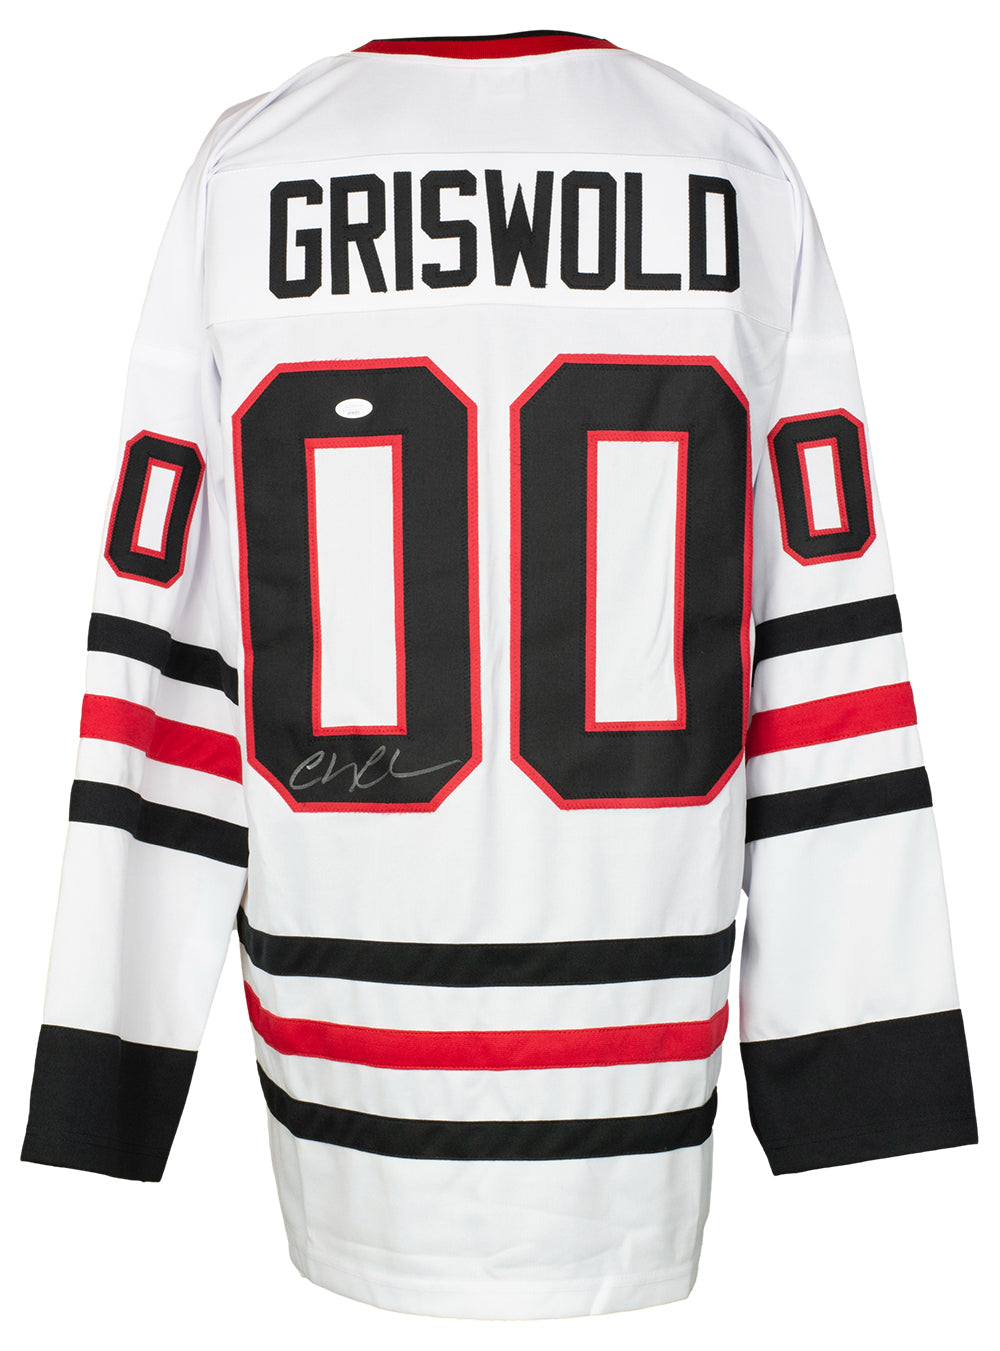 Chevy Chase Signed Custom Griswold Christmas Vacation Jersey JSA